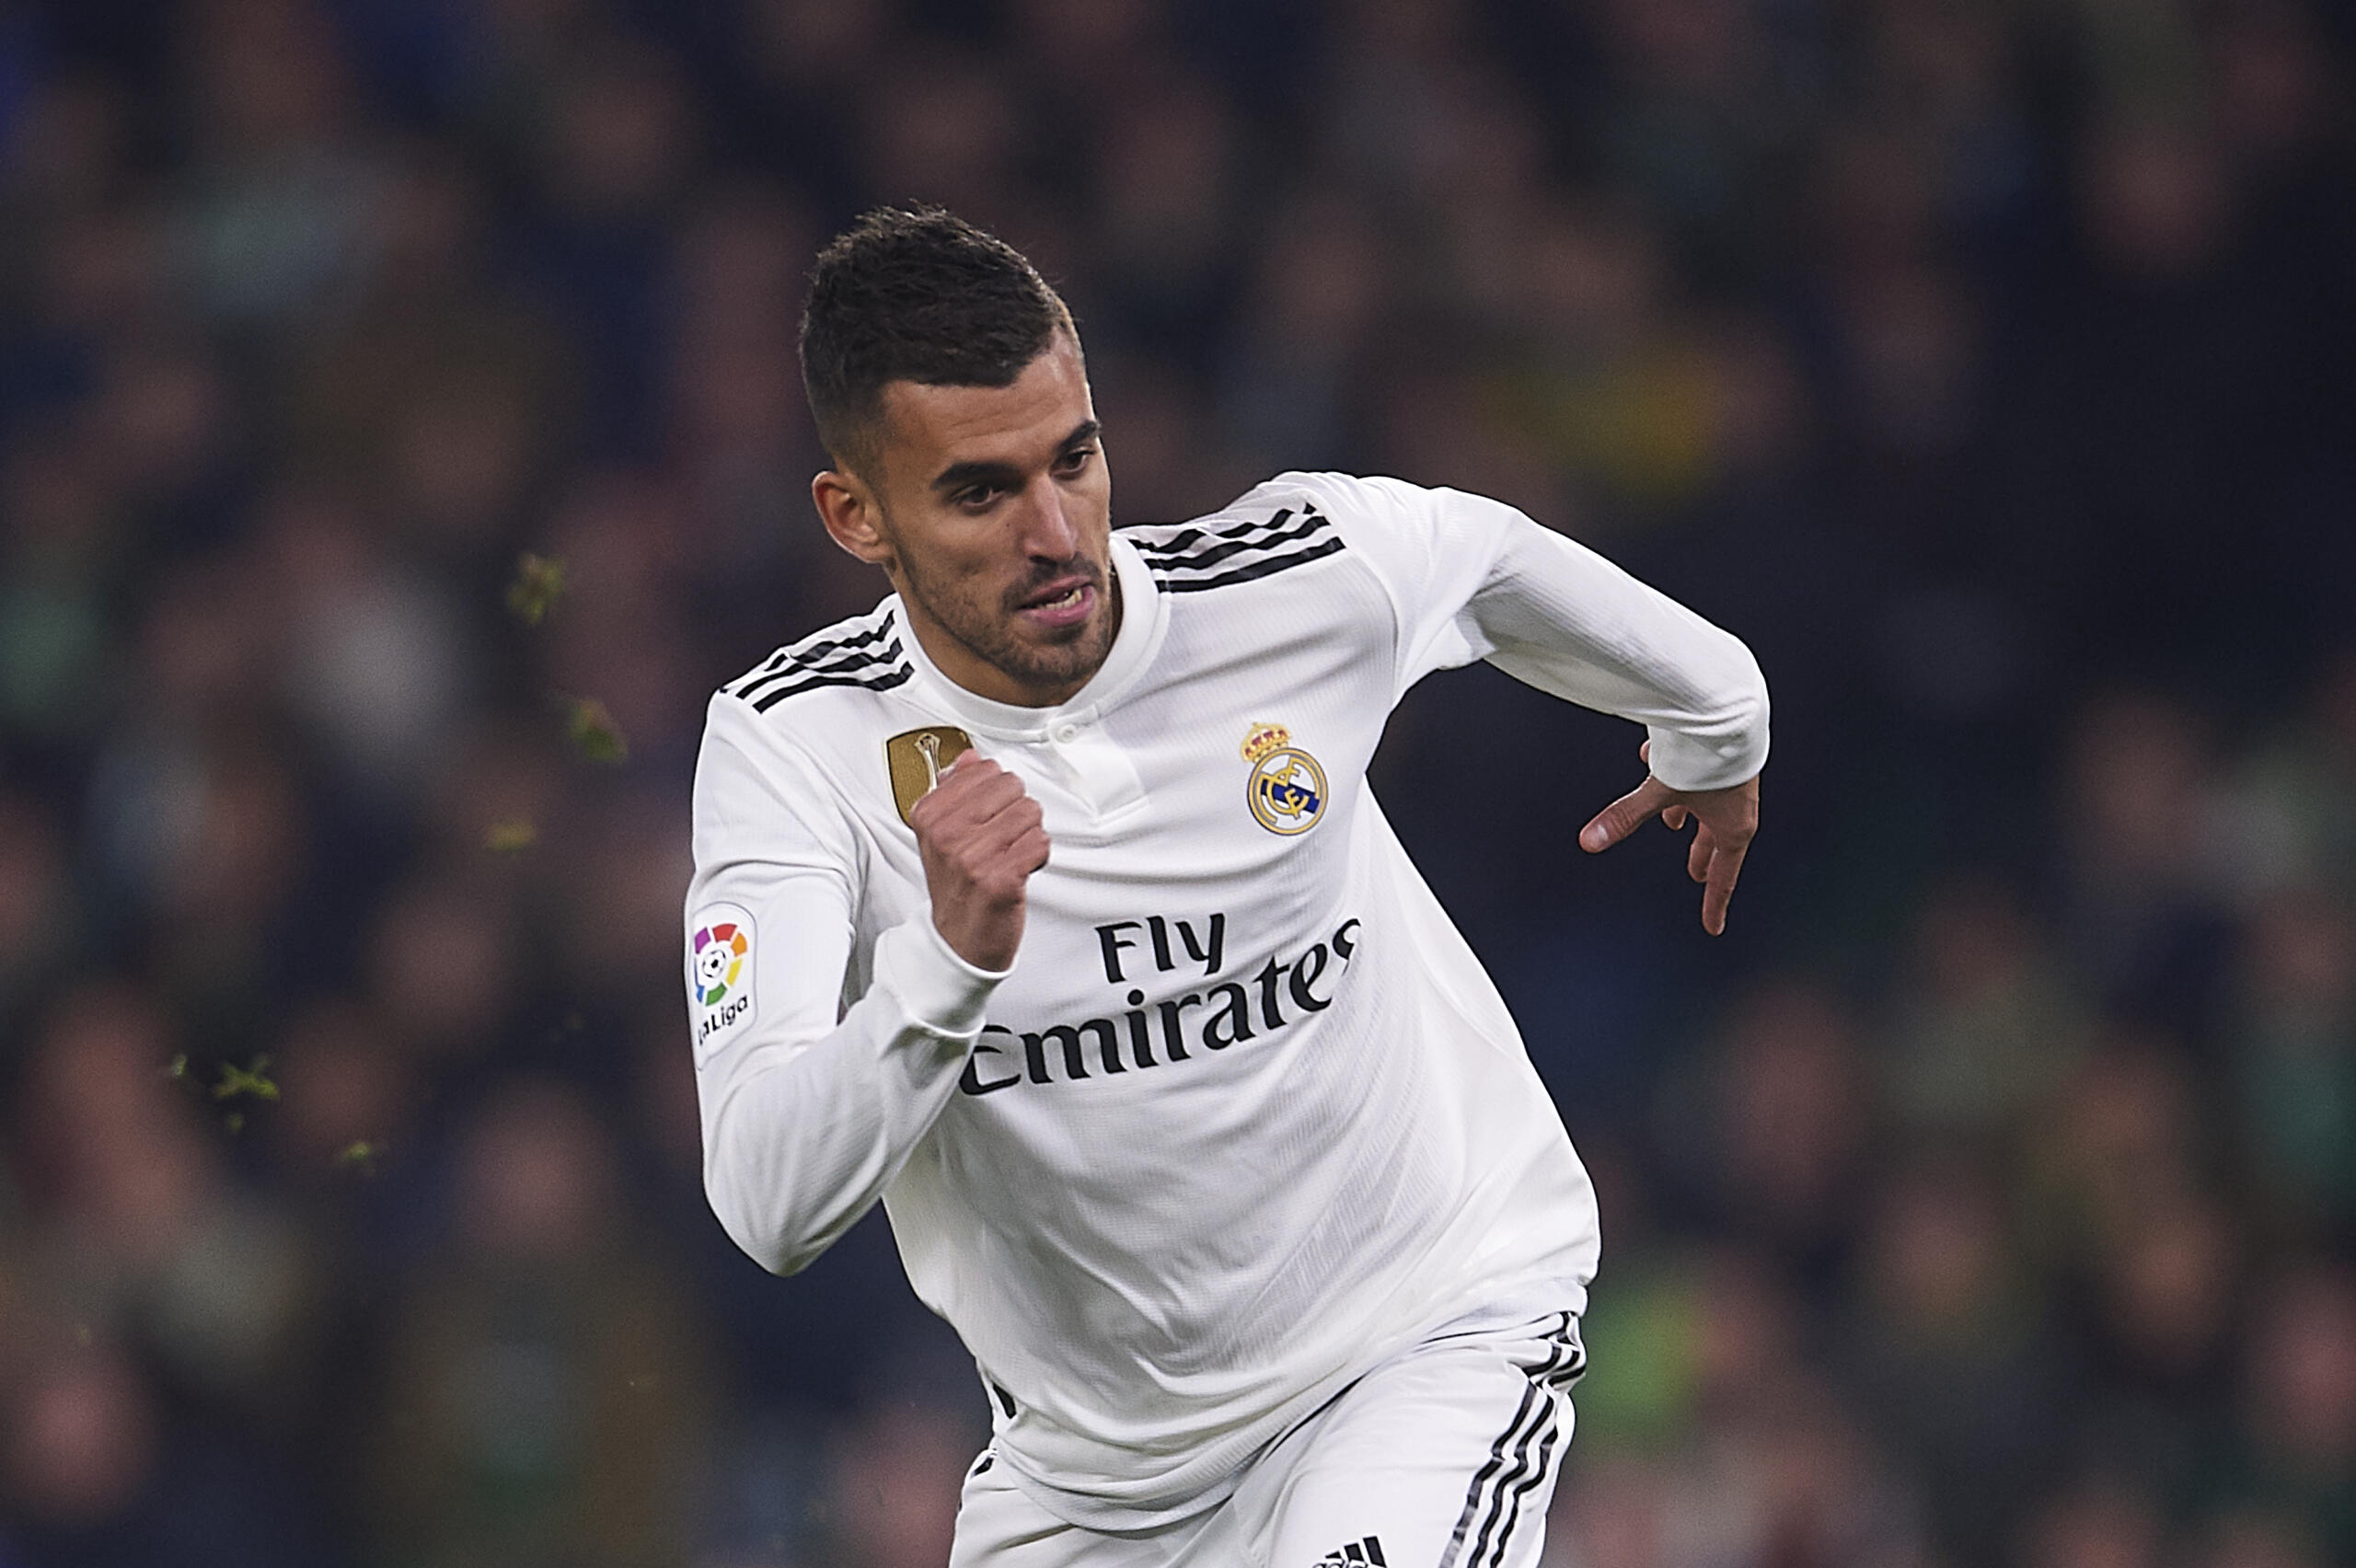 Milan have slowly gained interest in Real Madrid outcast Dani Ceballos. This is not the first time the Italian champions have been linked with him.